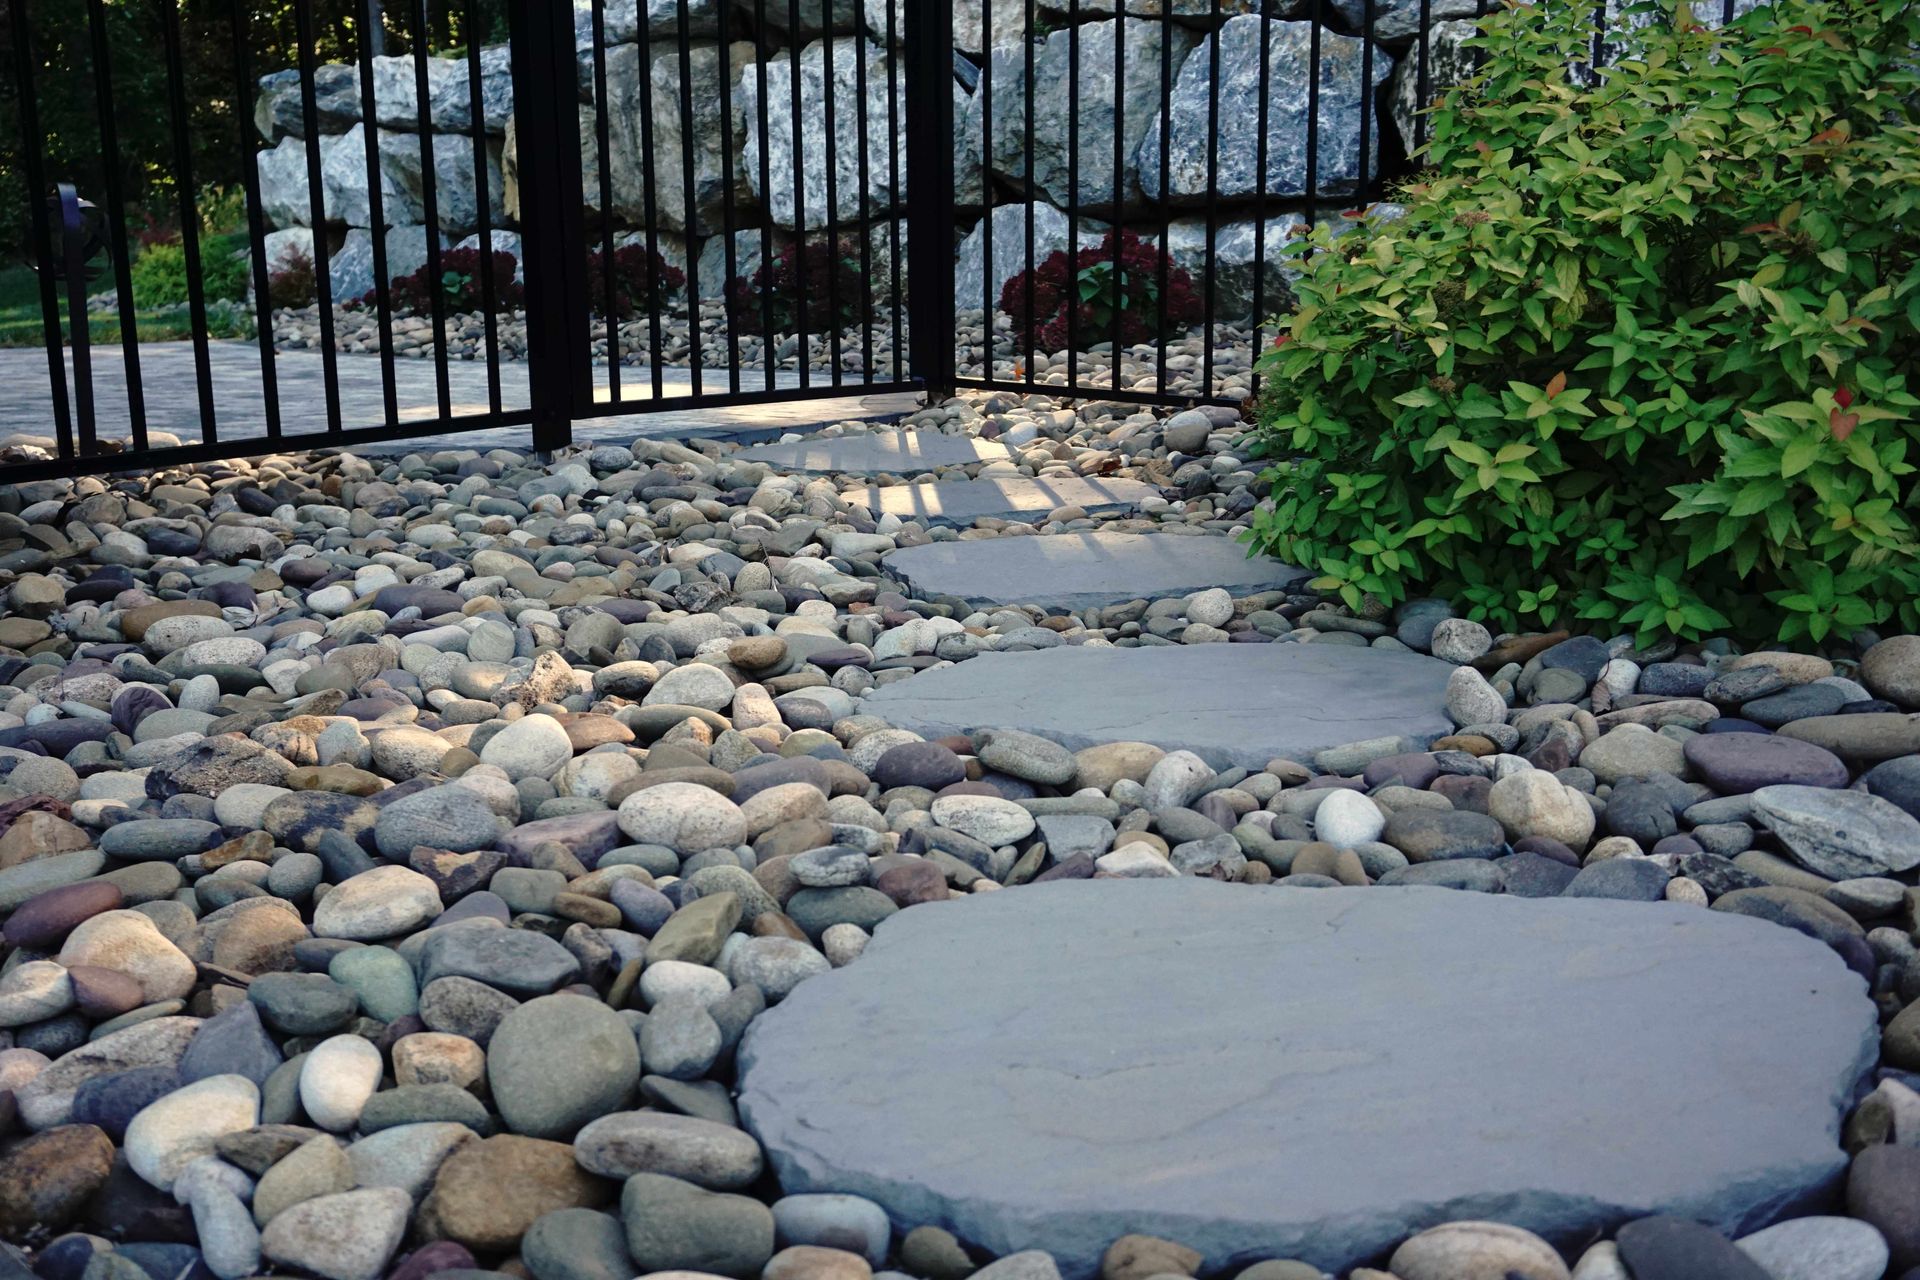 Random Stepping Stones for walkways for Sale Near Me. Pavers & Wall Blocks delivered to Lebanon, Annville, Palmyra, & Cornwall.